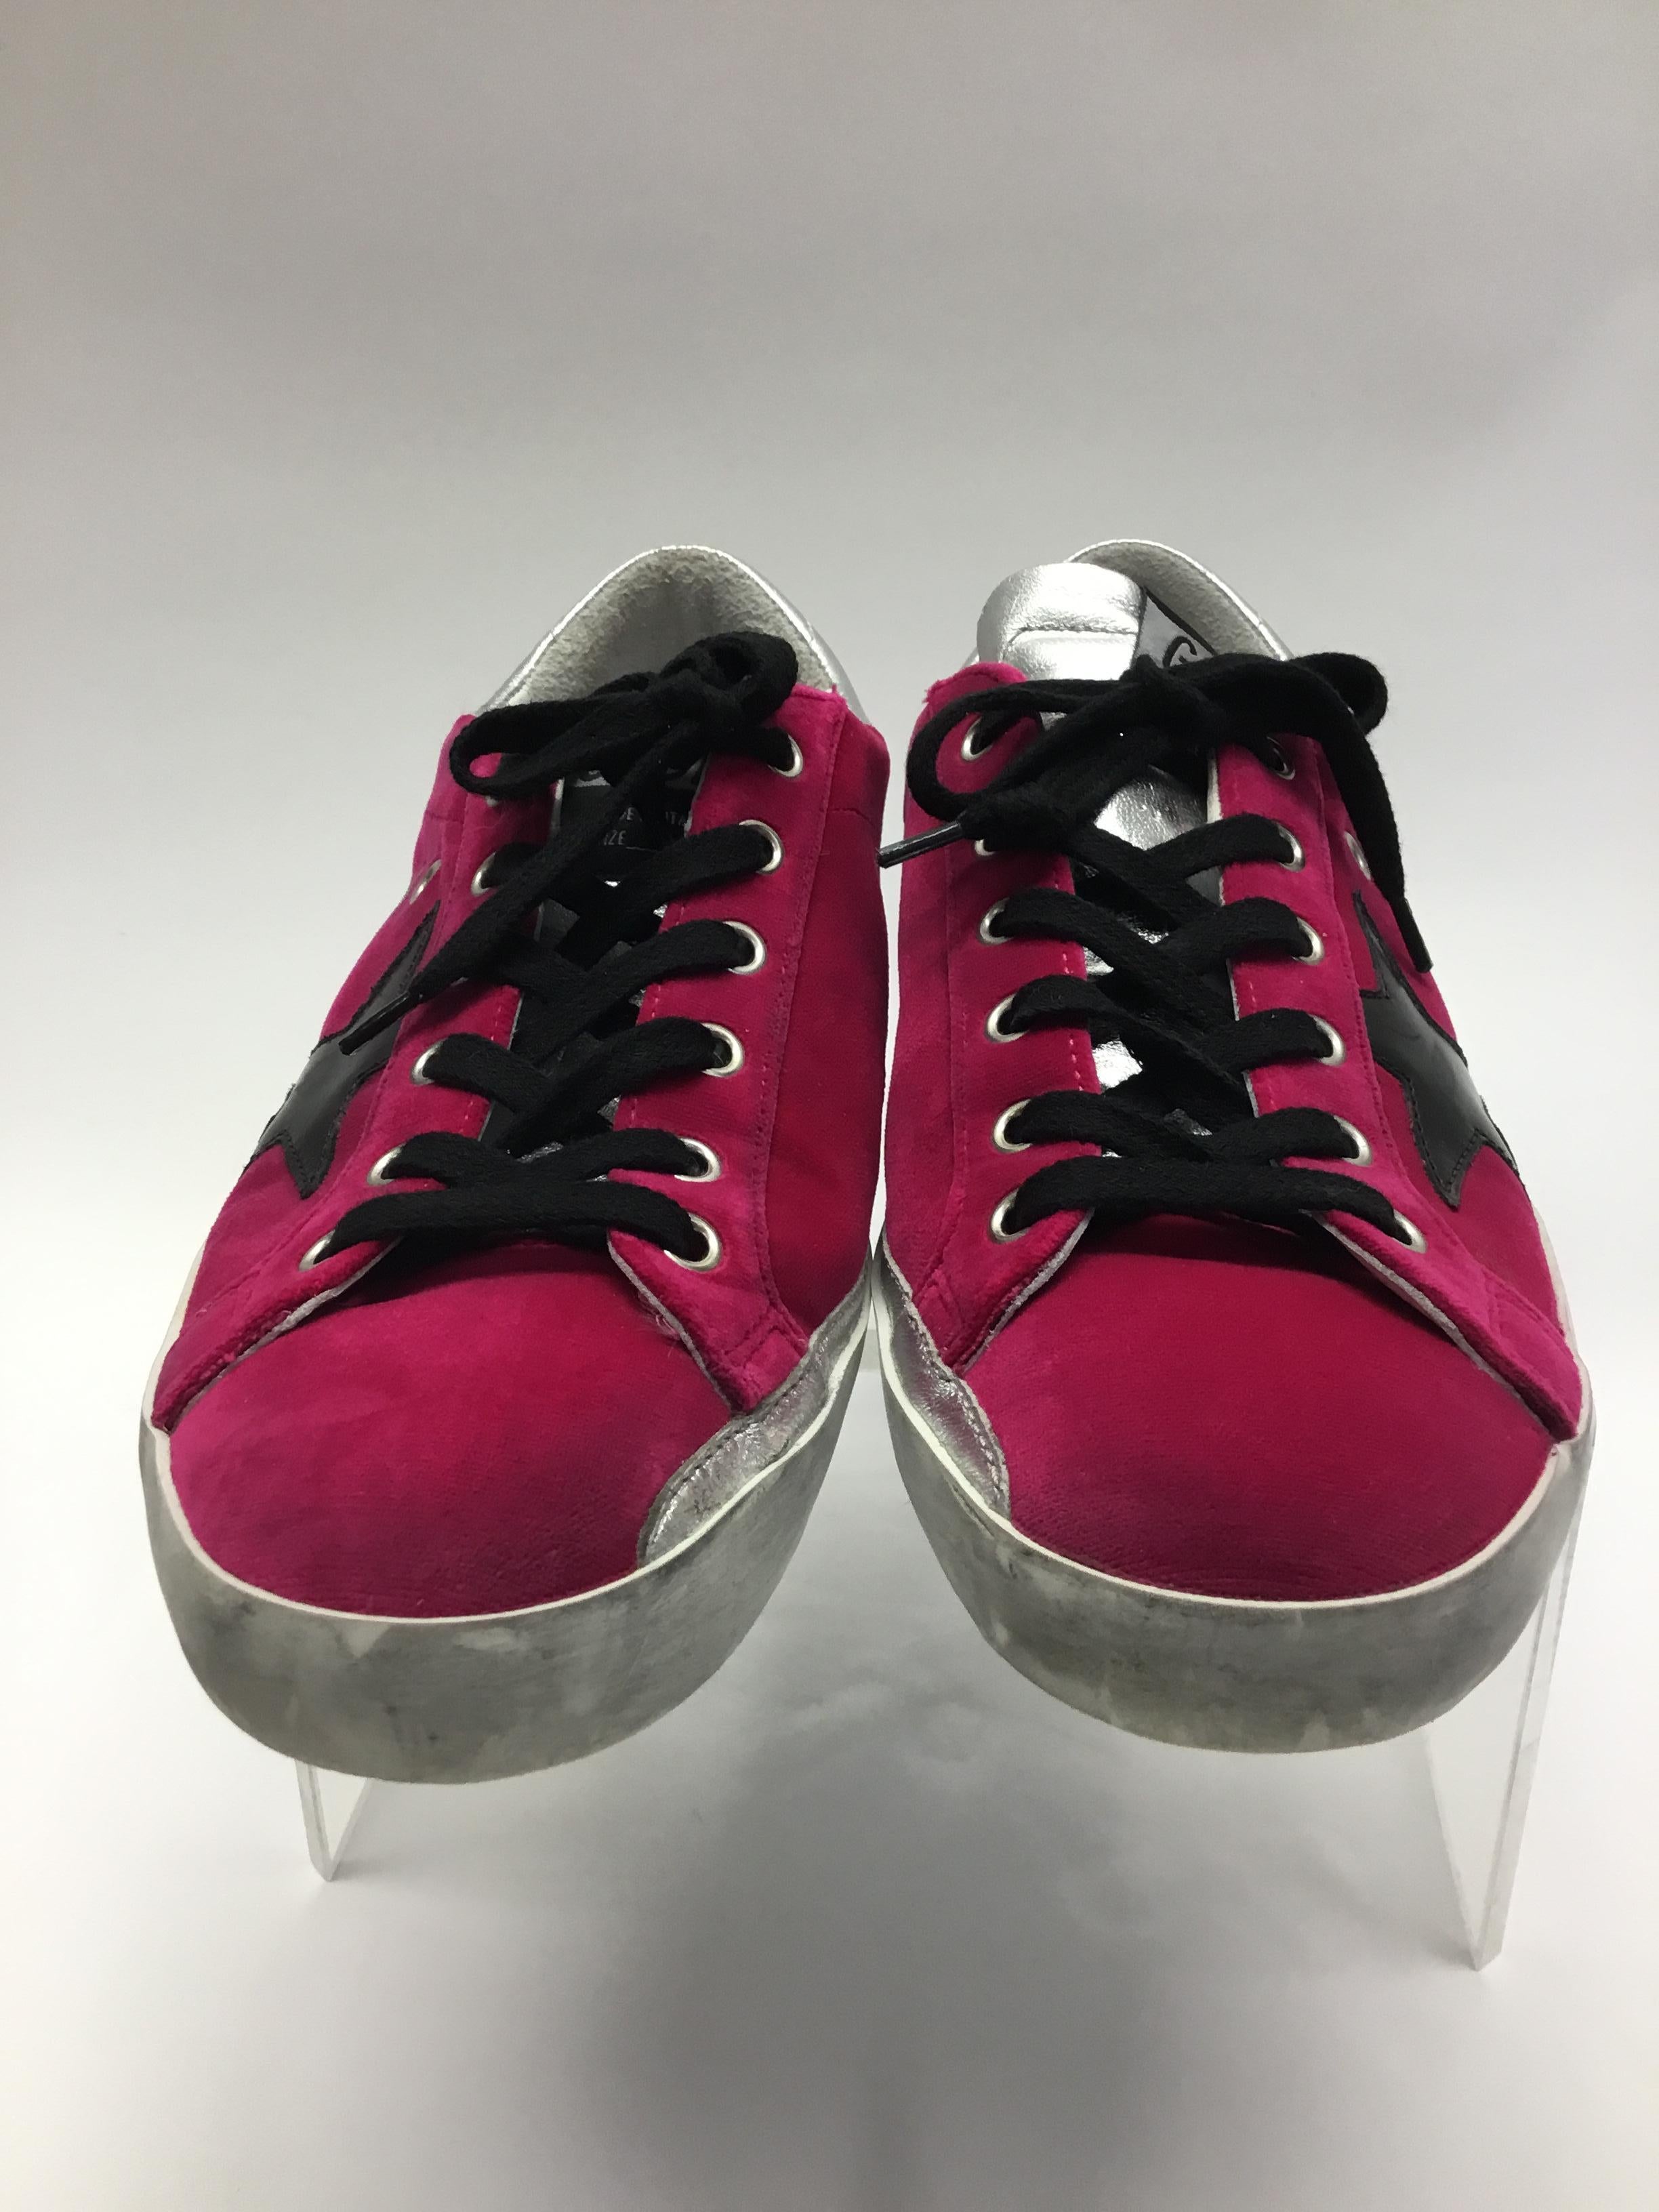 Golden Goose Pink Velvet Sneakers
$399
Made in Italy
Leather interior
Size 37